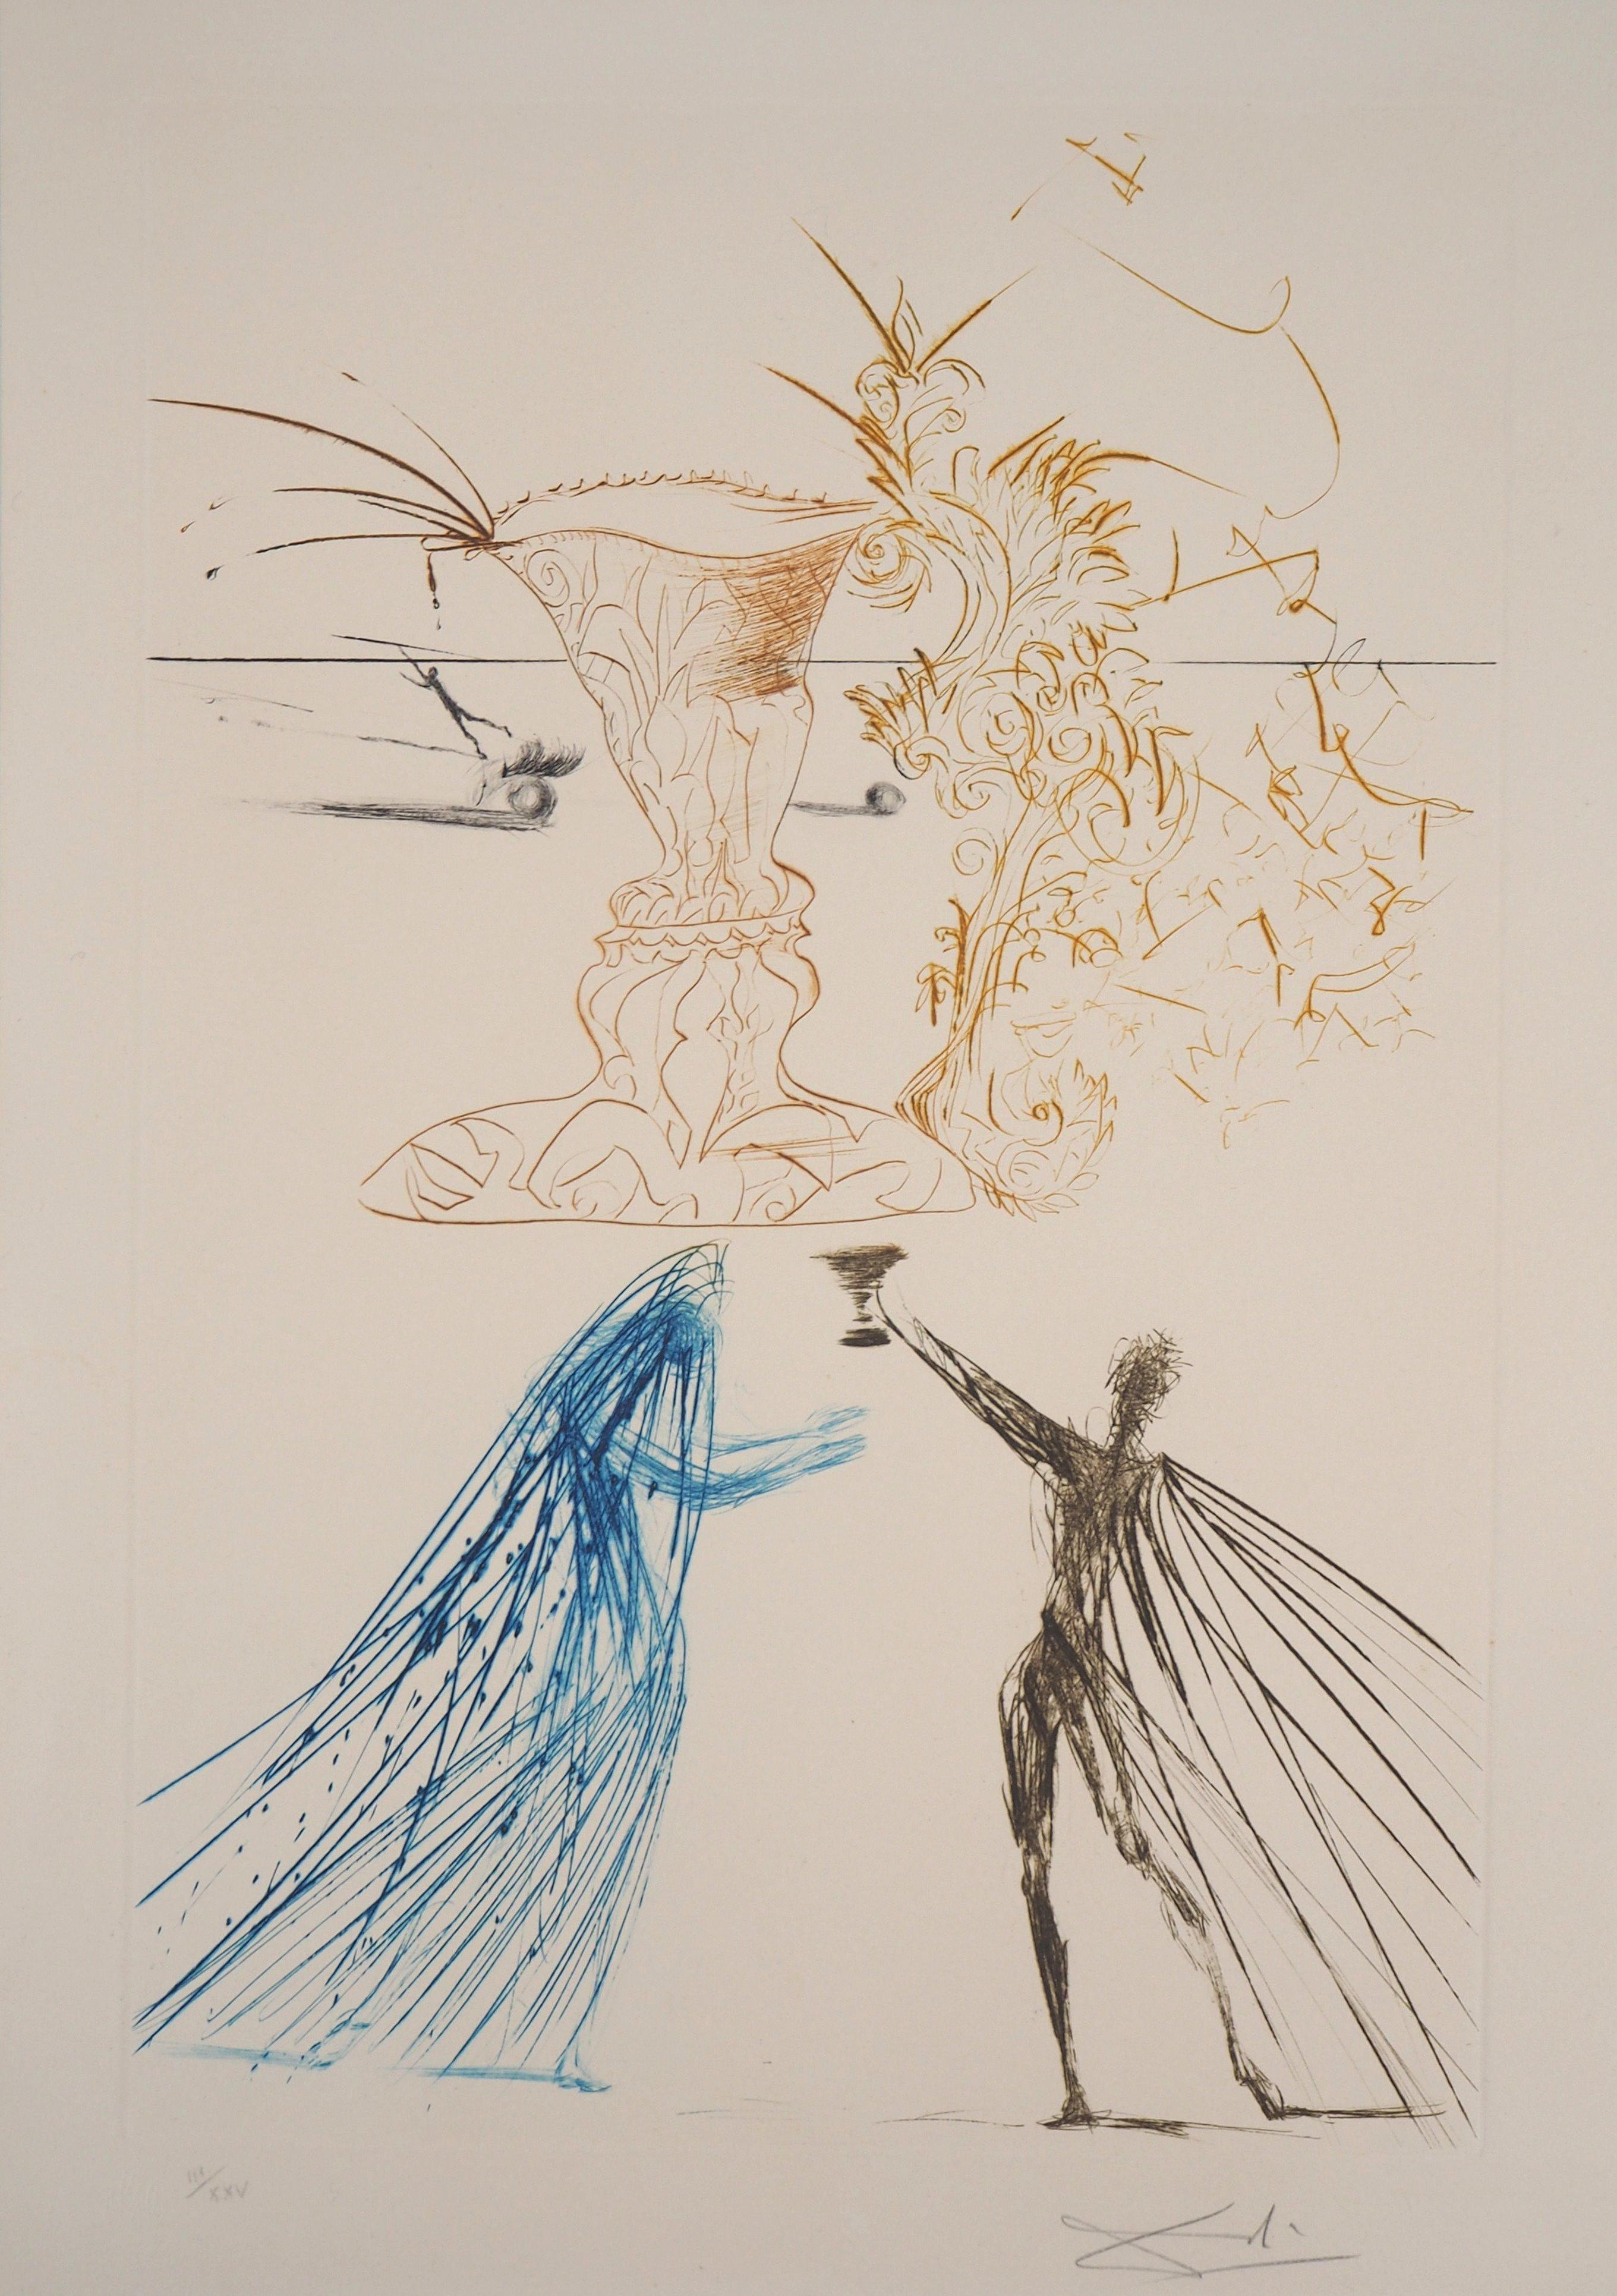 Tristan and Iseult and Cup Faces, 1970 - Original Handsigned Etching  1